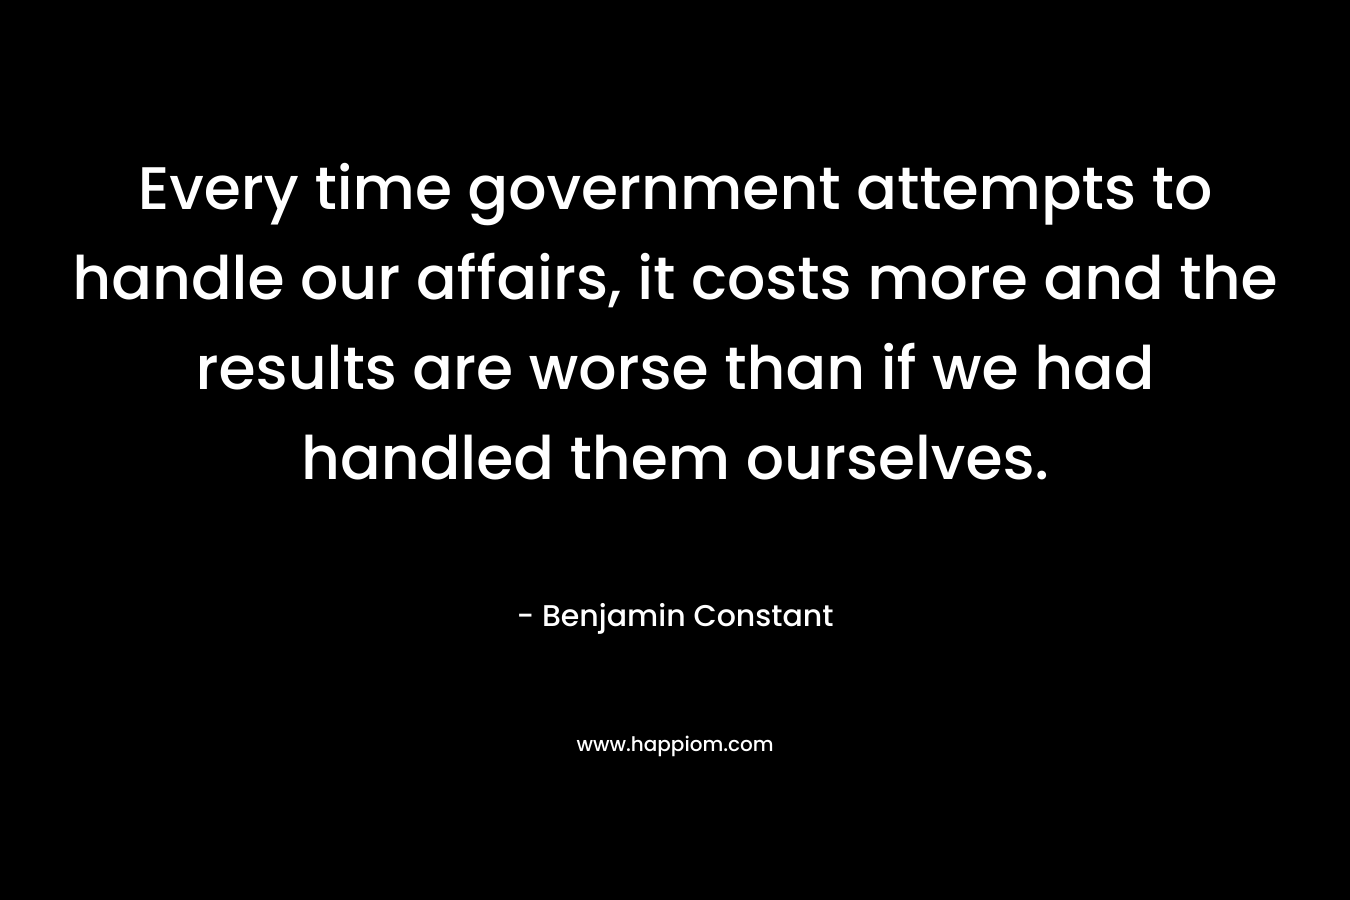 Every time government attempts to handle our affairs, it costs more and the results are worse than if we had handled them ourselves. – Benjamin Constant